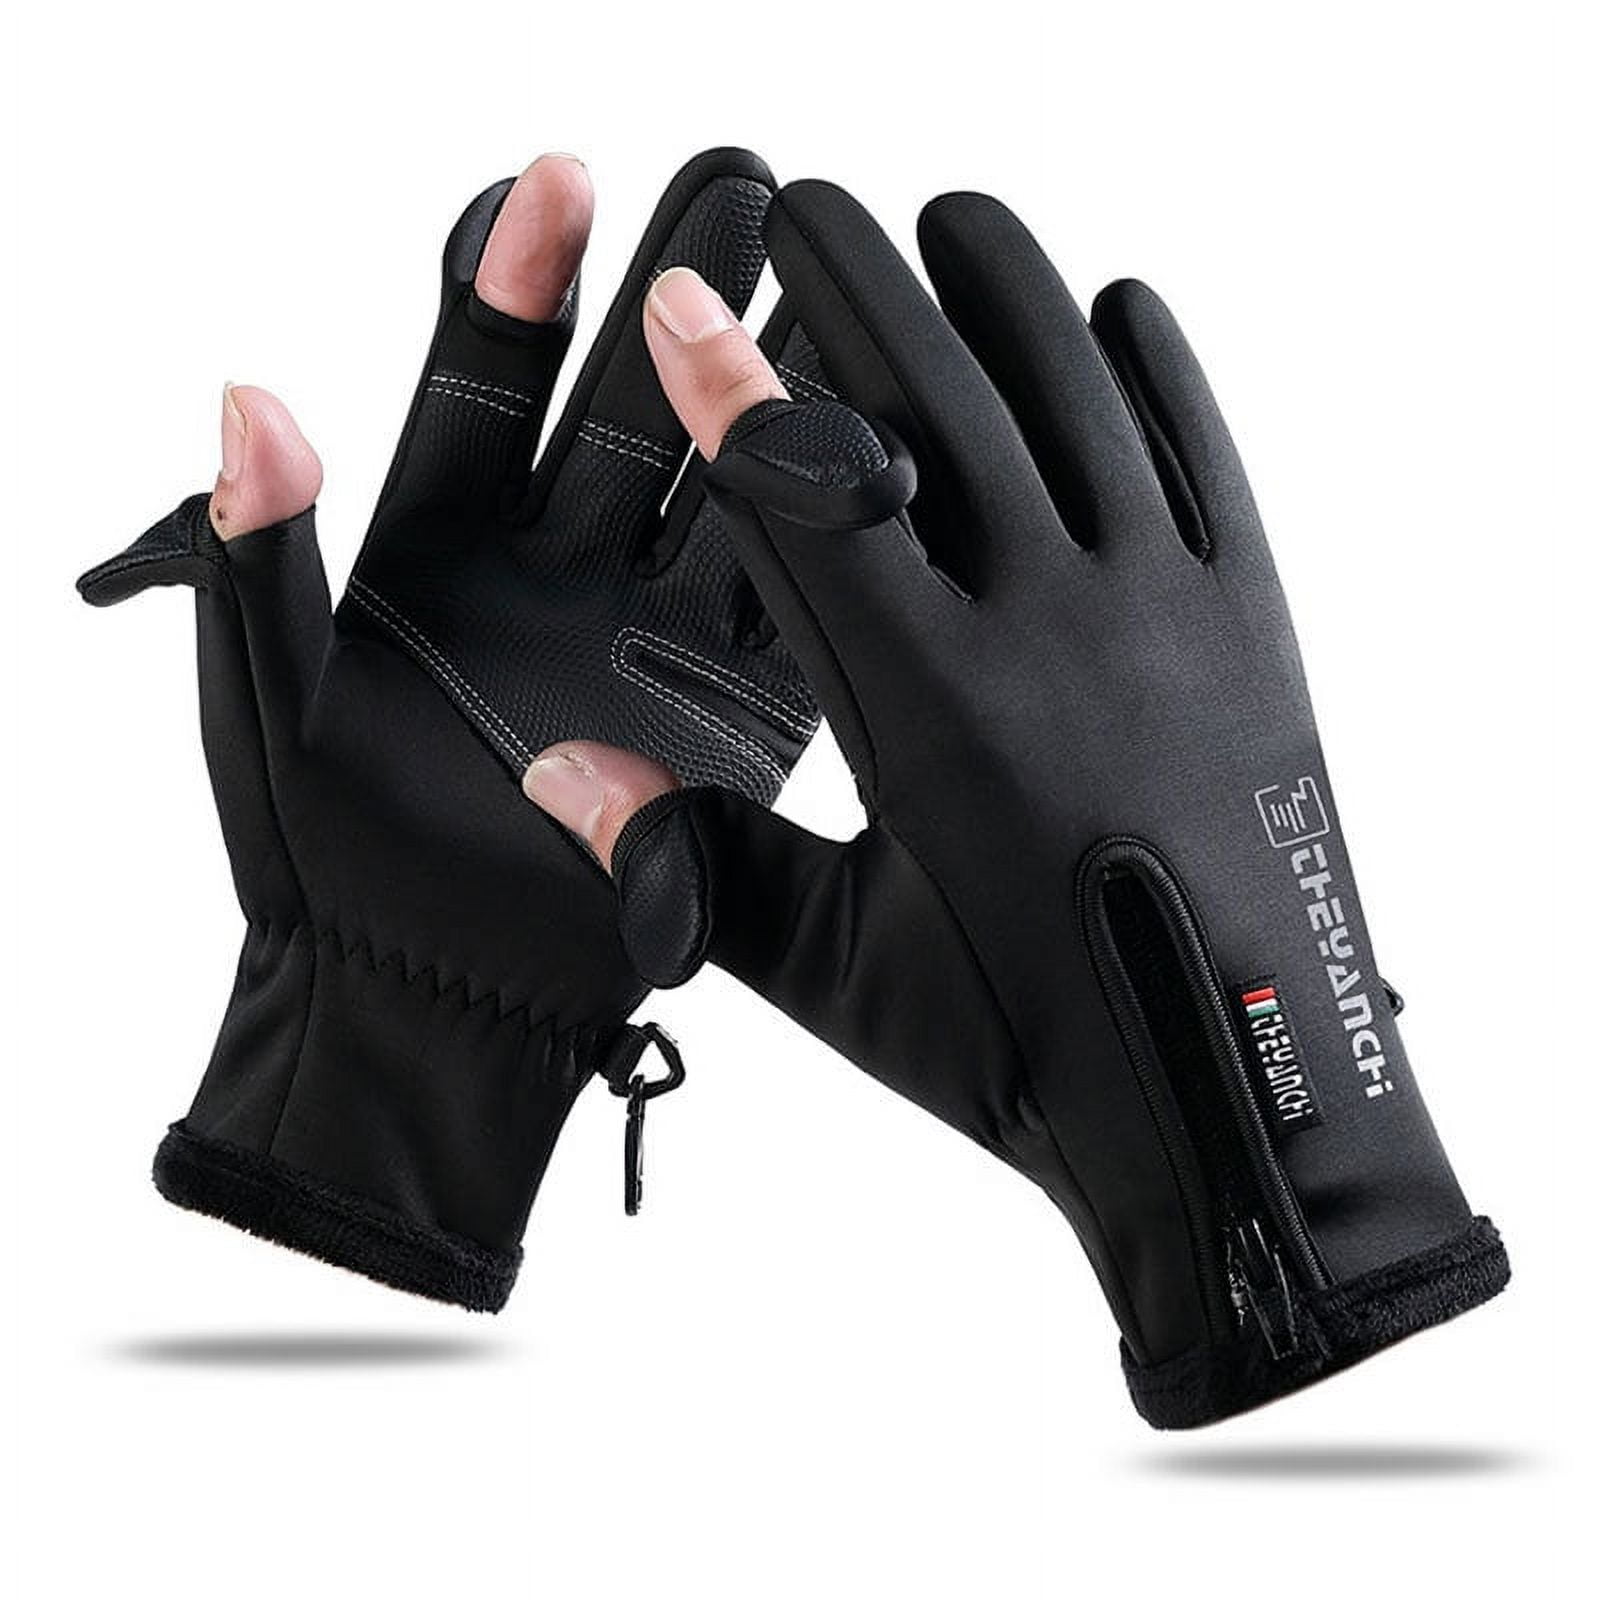 TERGAYEE Fishing Catching Gloves,Fishing Glove with Magnet Release